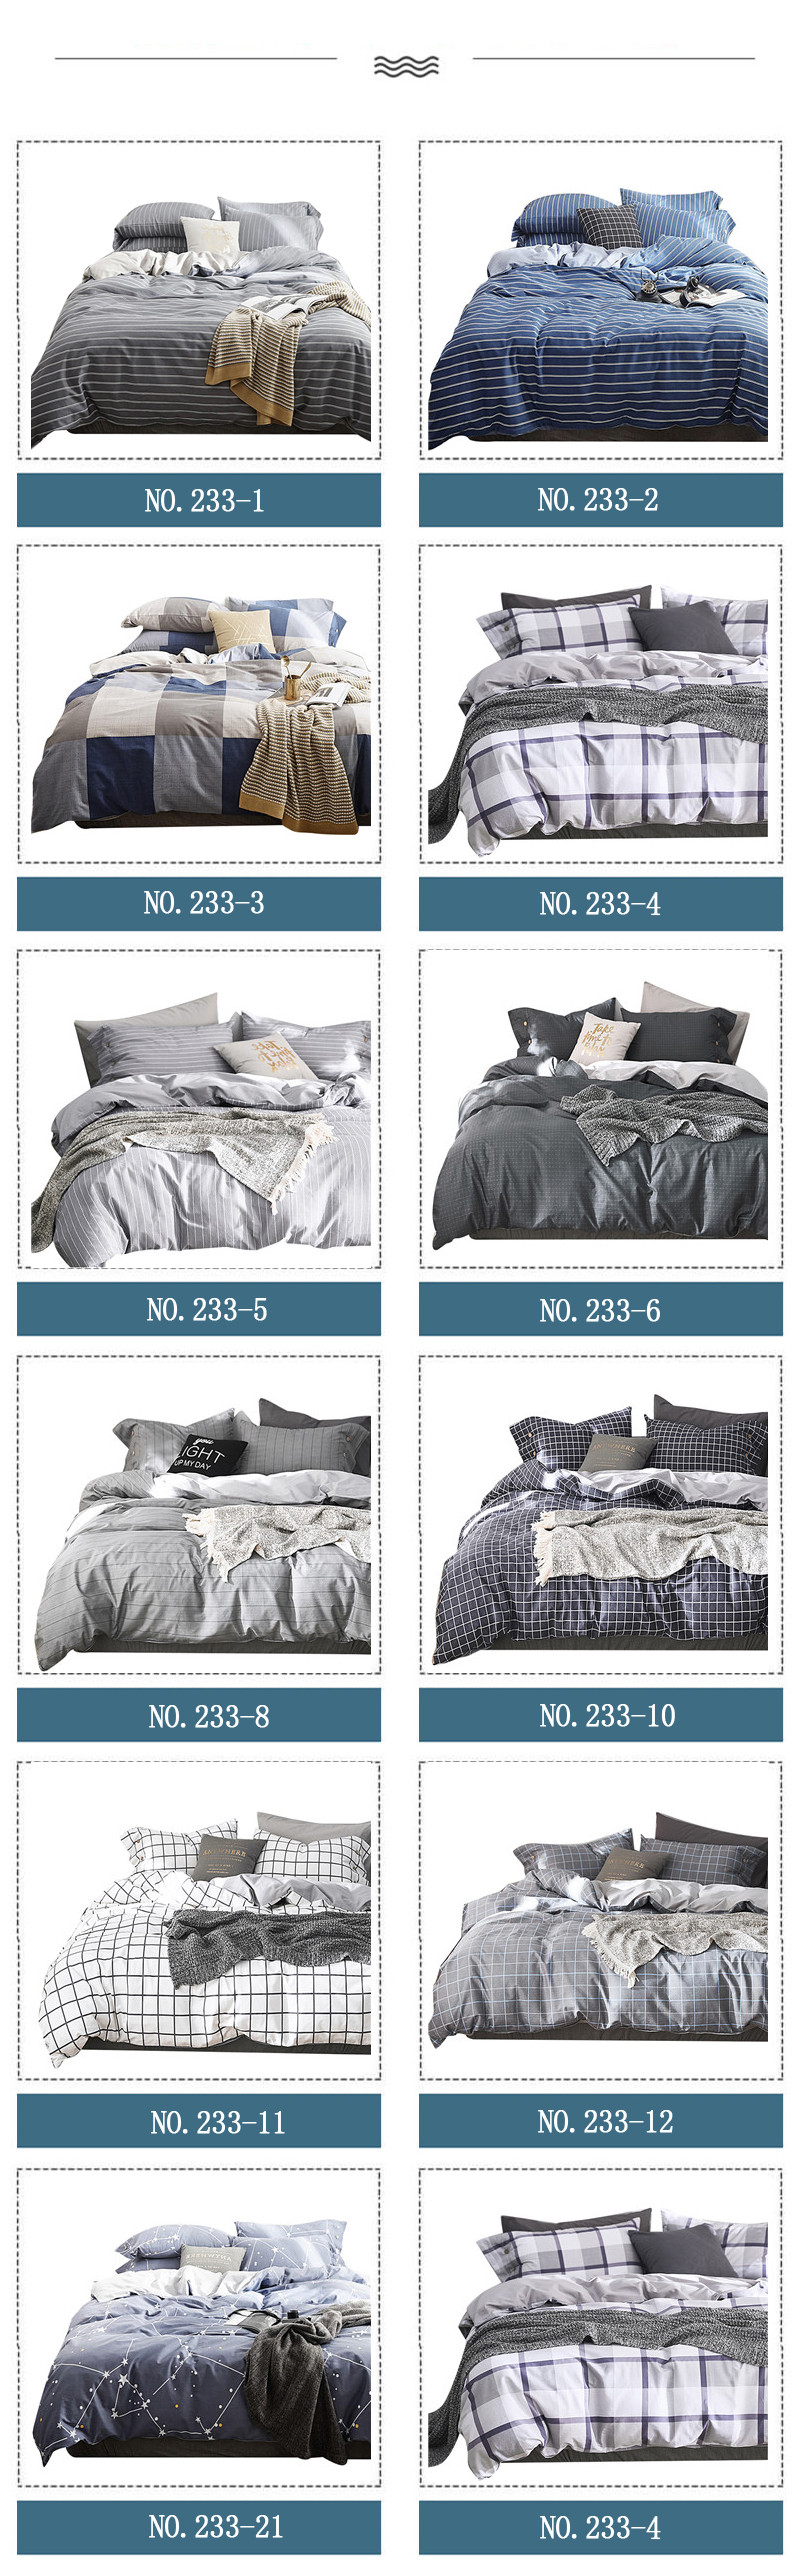 Bed Sheet New Product 3 Piece